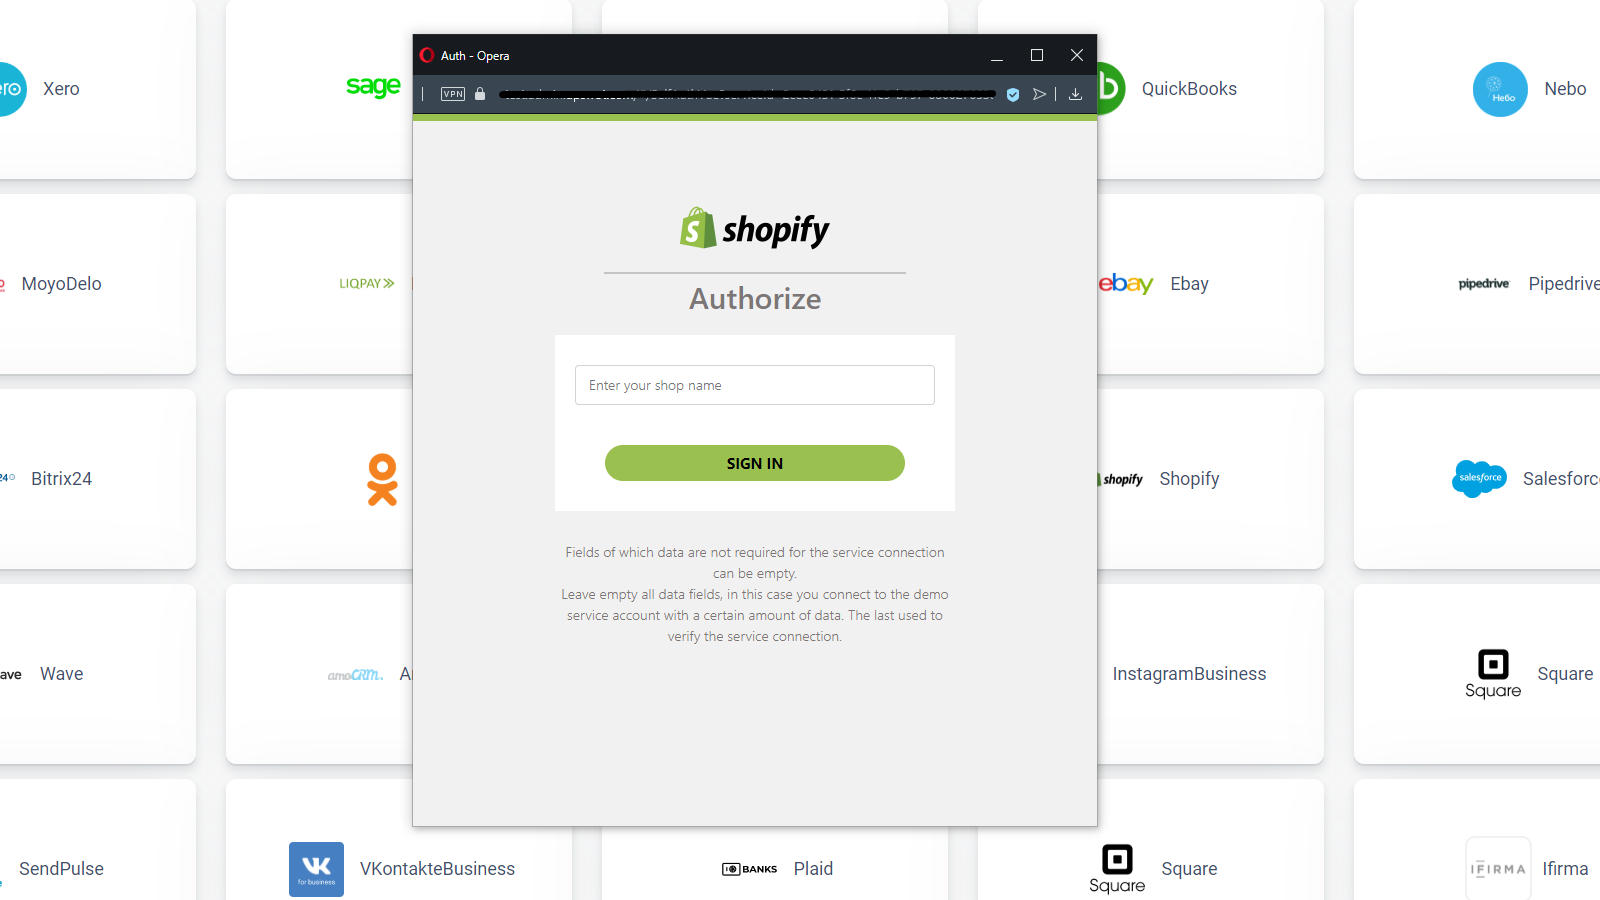 Your Shopify data becomes part of your dashboard